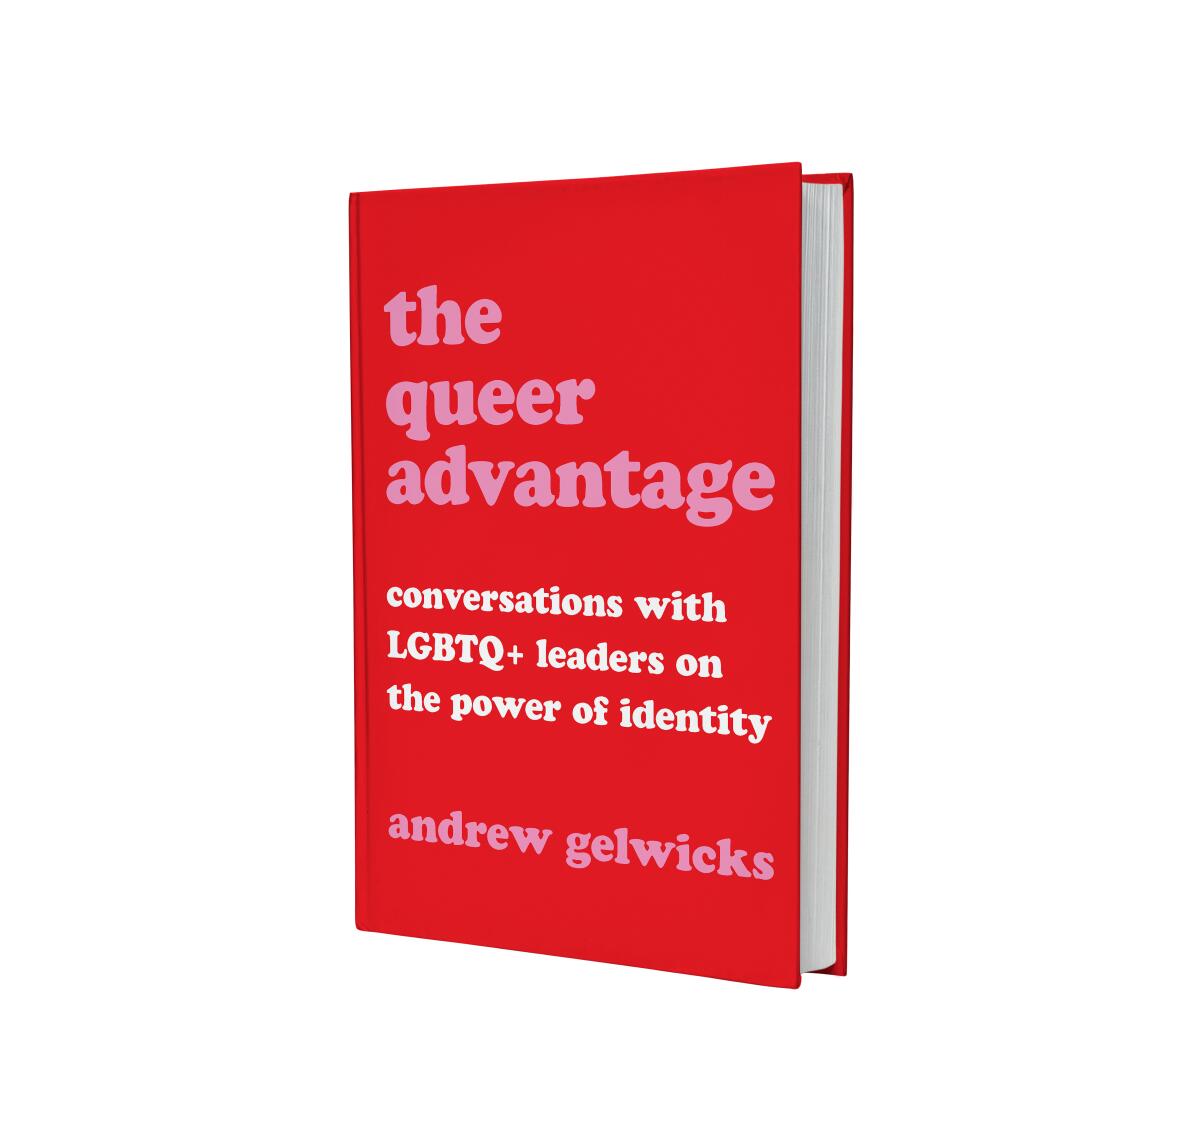 The book cover of “The Queer Advantage: Conversations With LGBTQ+ Leaders on the Power of Identity" by Andrew Gelwicks.